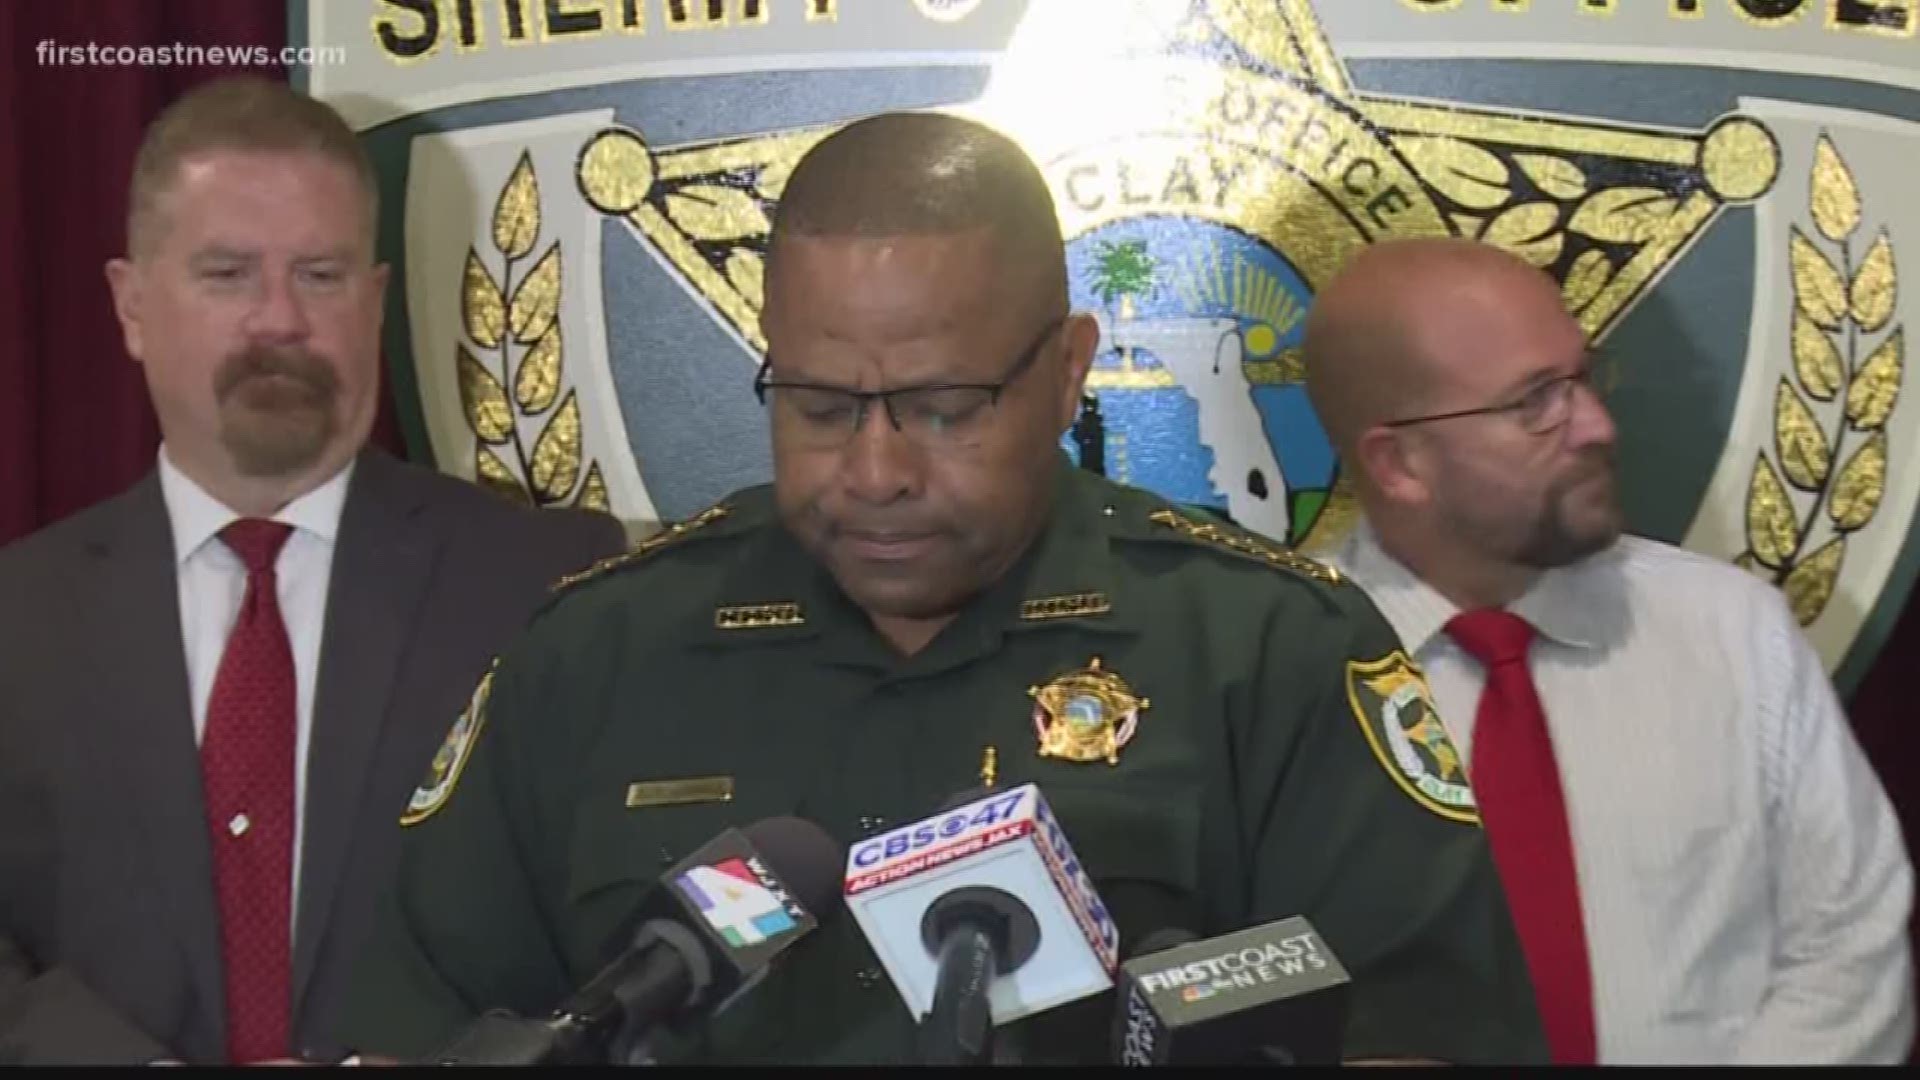 Sheriff Darryl Daniels spoke to the media about an arrest in a home invasion. The news conference marked Daniels first time in front of the media since his own personal scandal unfolded. He abruptly left the conference and avoided questioning.